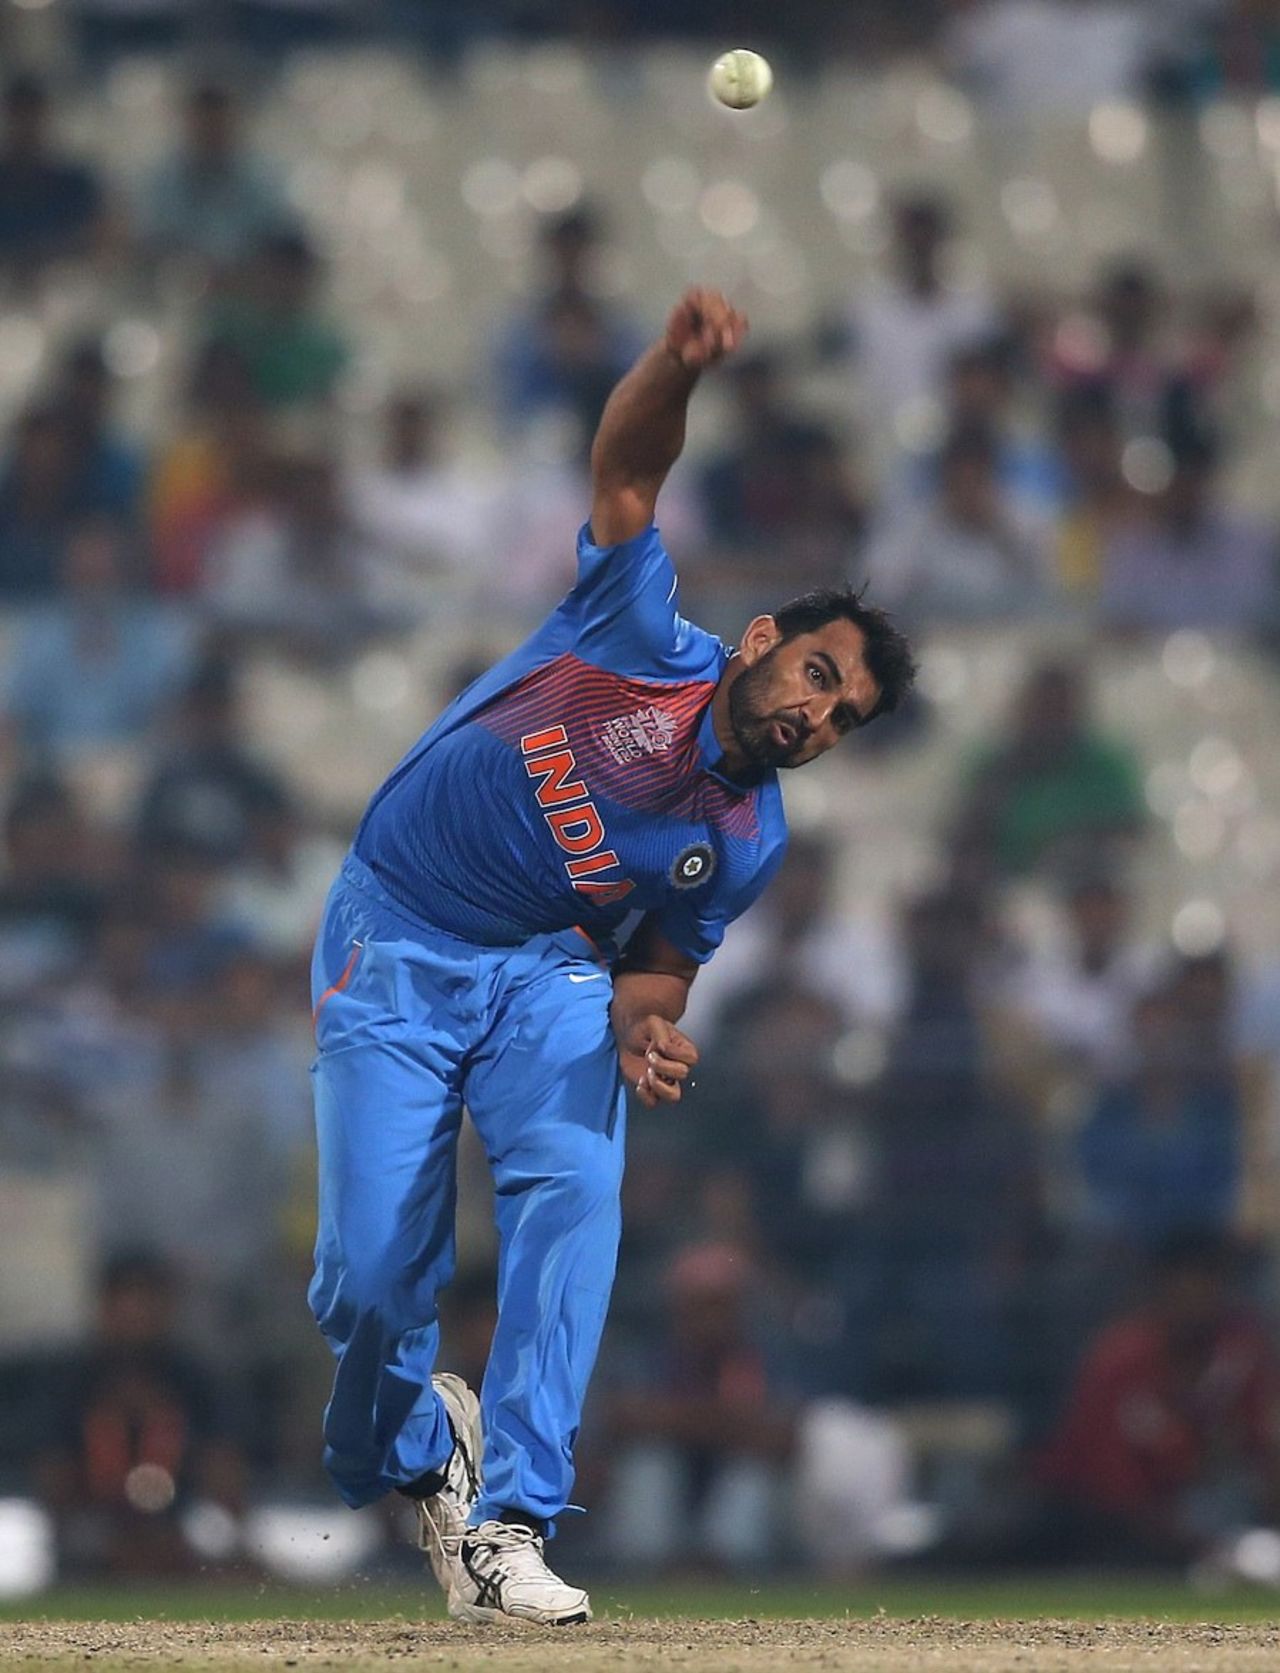 Mohammed Shami in action on his comeback from injury, India v West Indies, World T20 warm-ups, Kolkata, March 10, 2016